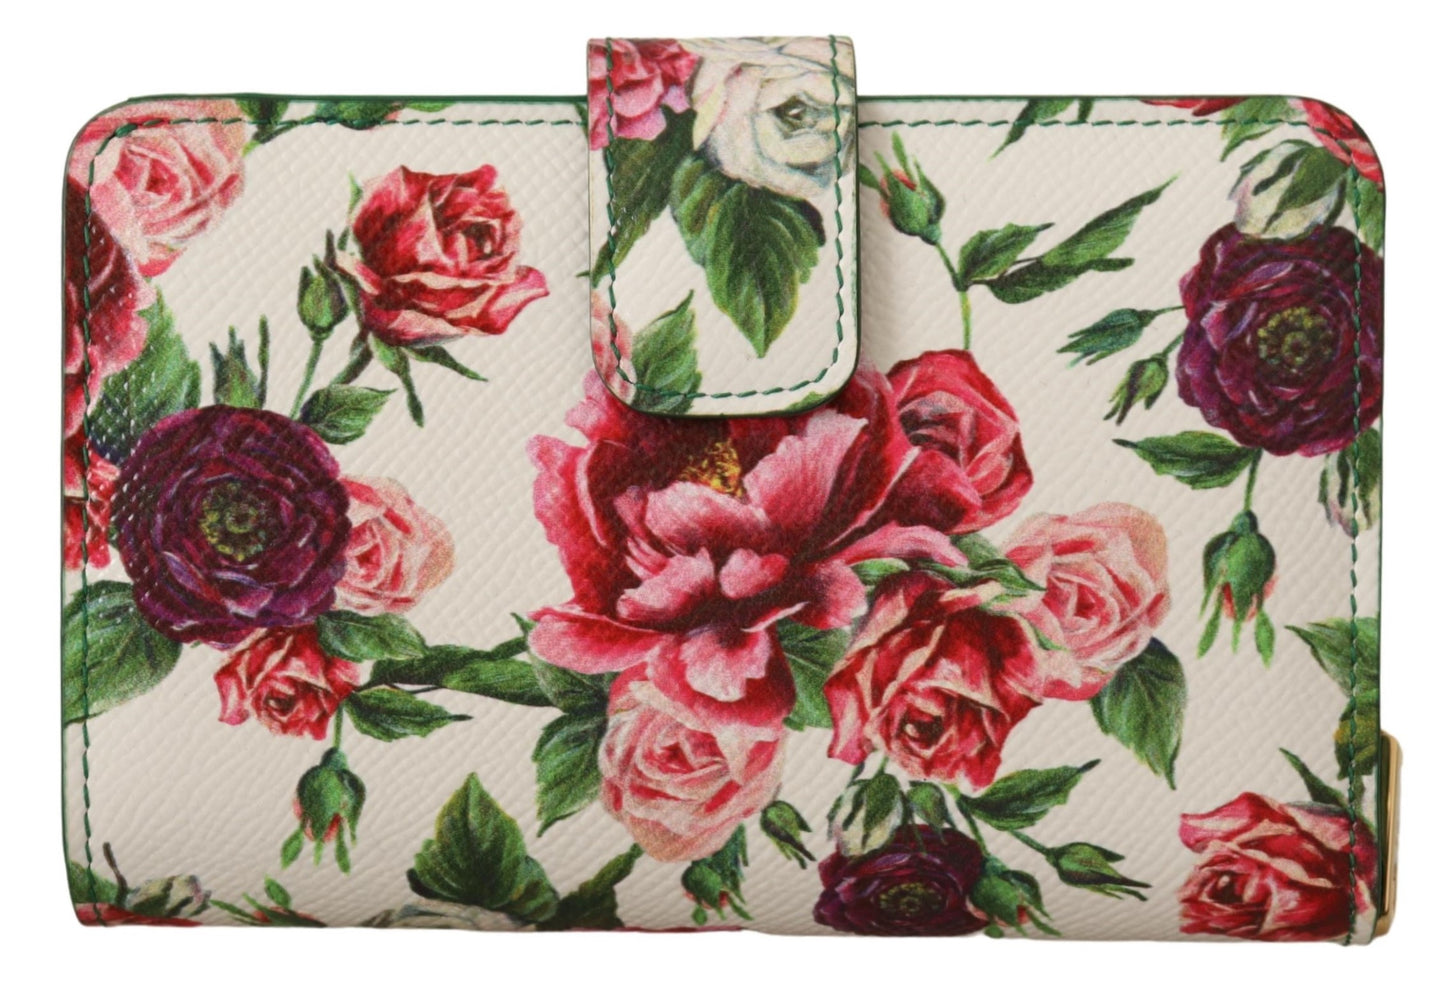 Multicolor Floral Leather Bifold Continental Clutch Wallet